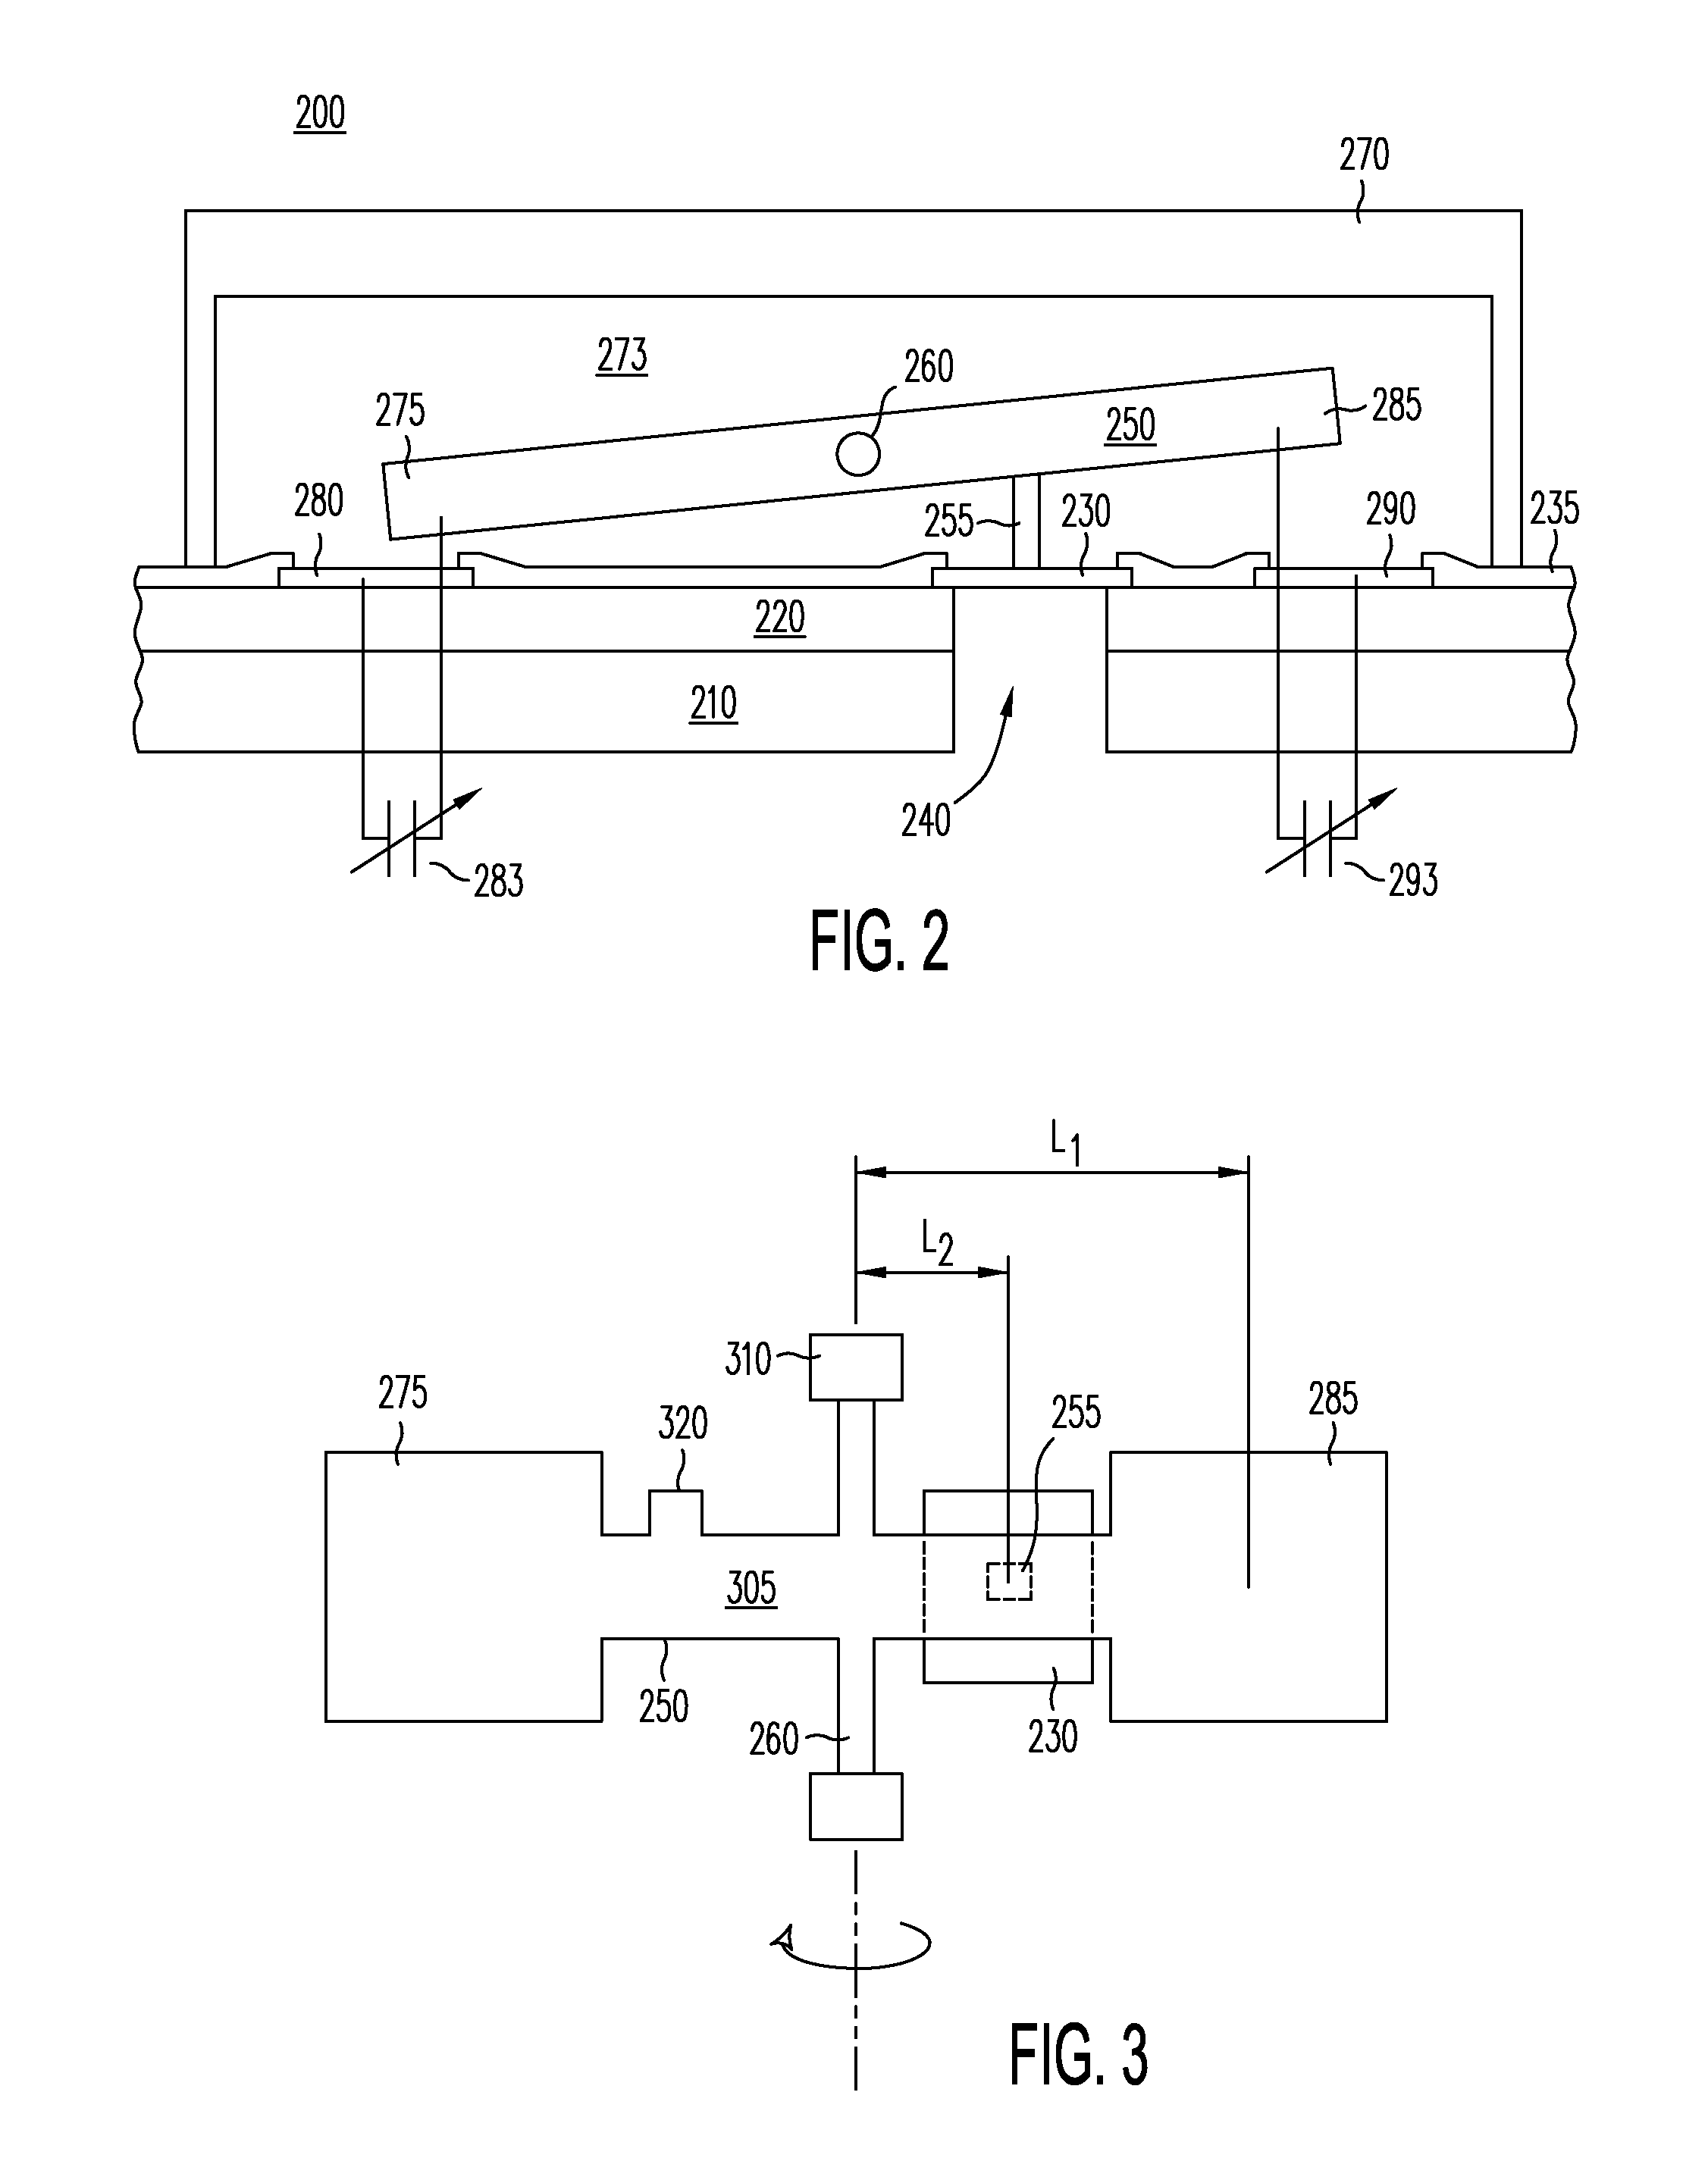 Pressure sensor with differential capacitive output